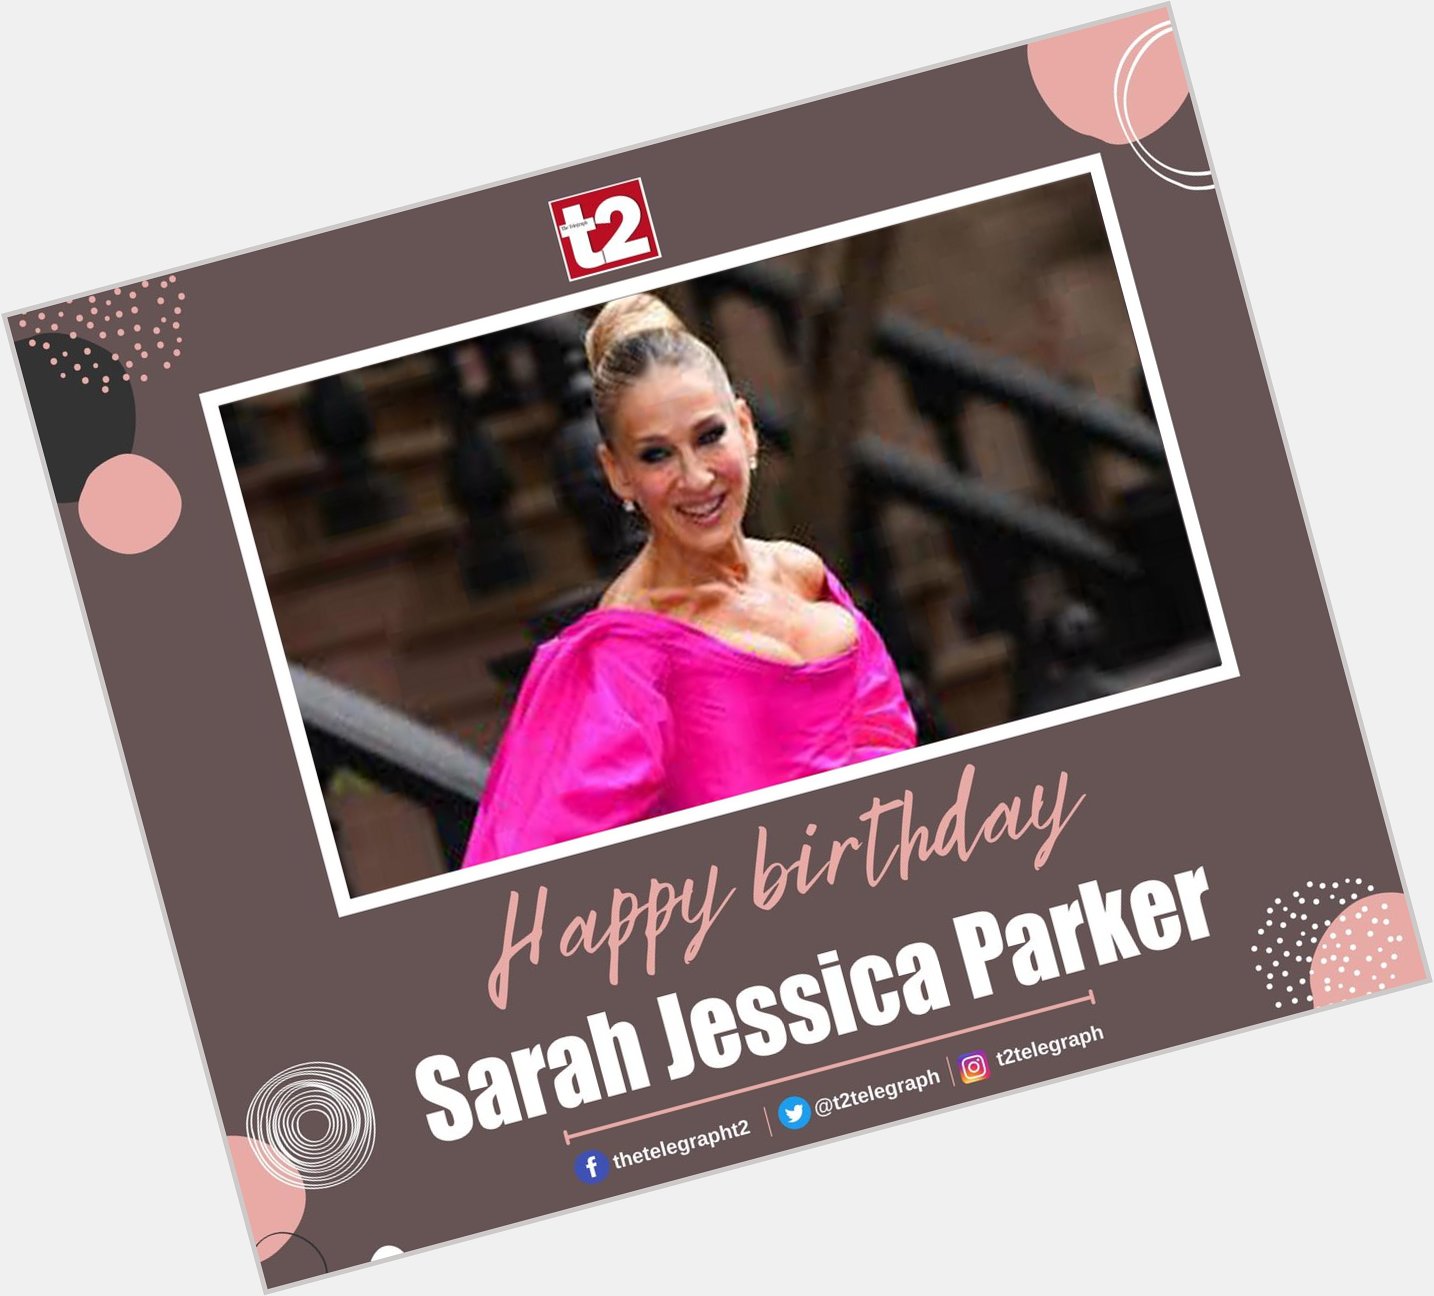 Carrie Bradshaw will always be our favourite style diva. Happy birthday Sarah Jessica Parker! 